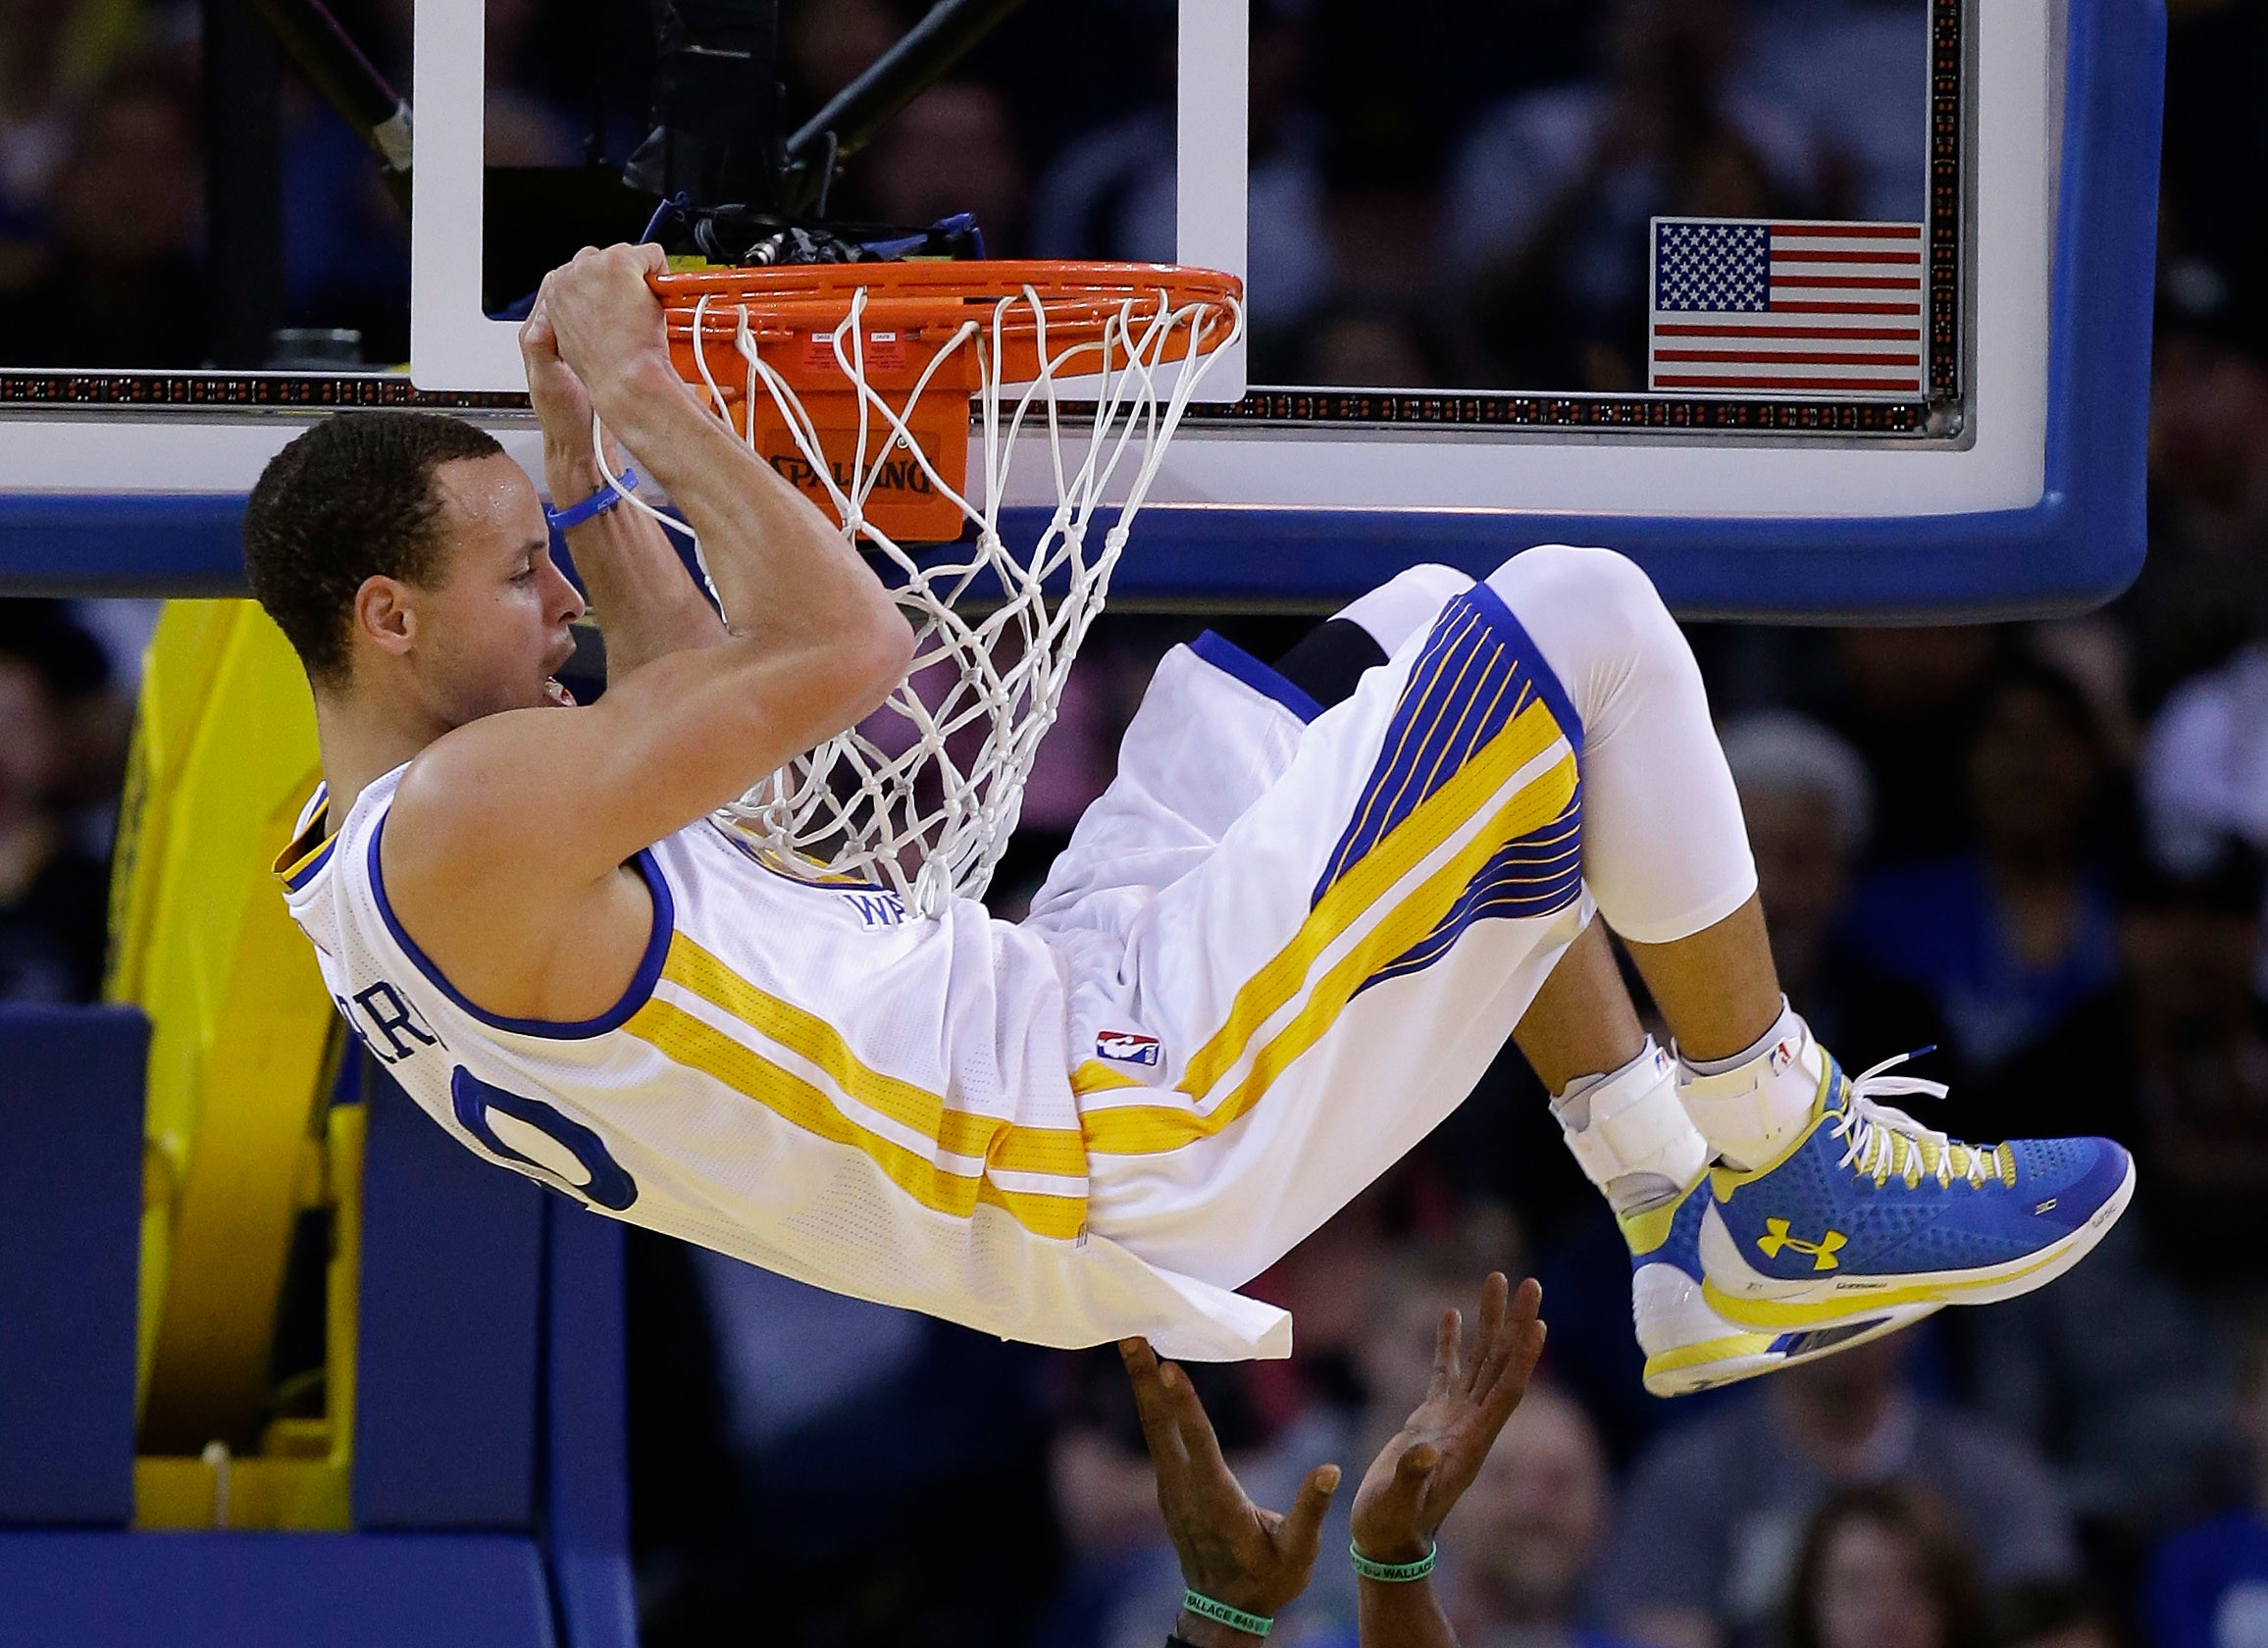 2312x1680 Stephen Curry, Here Finishing A Dunk, Is Already A Star, Known For His